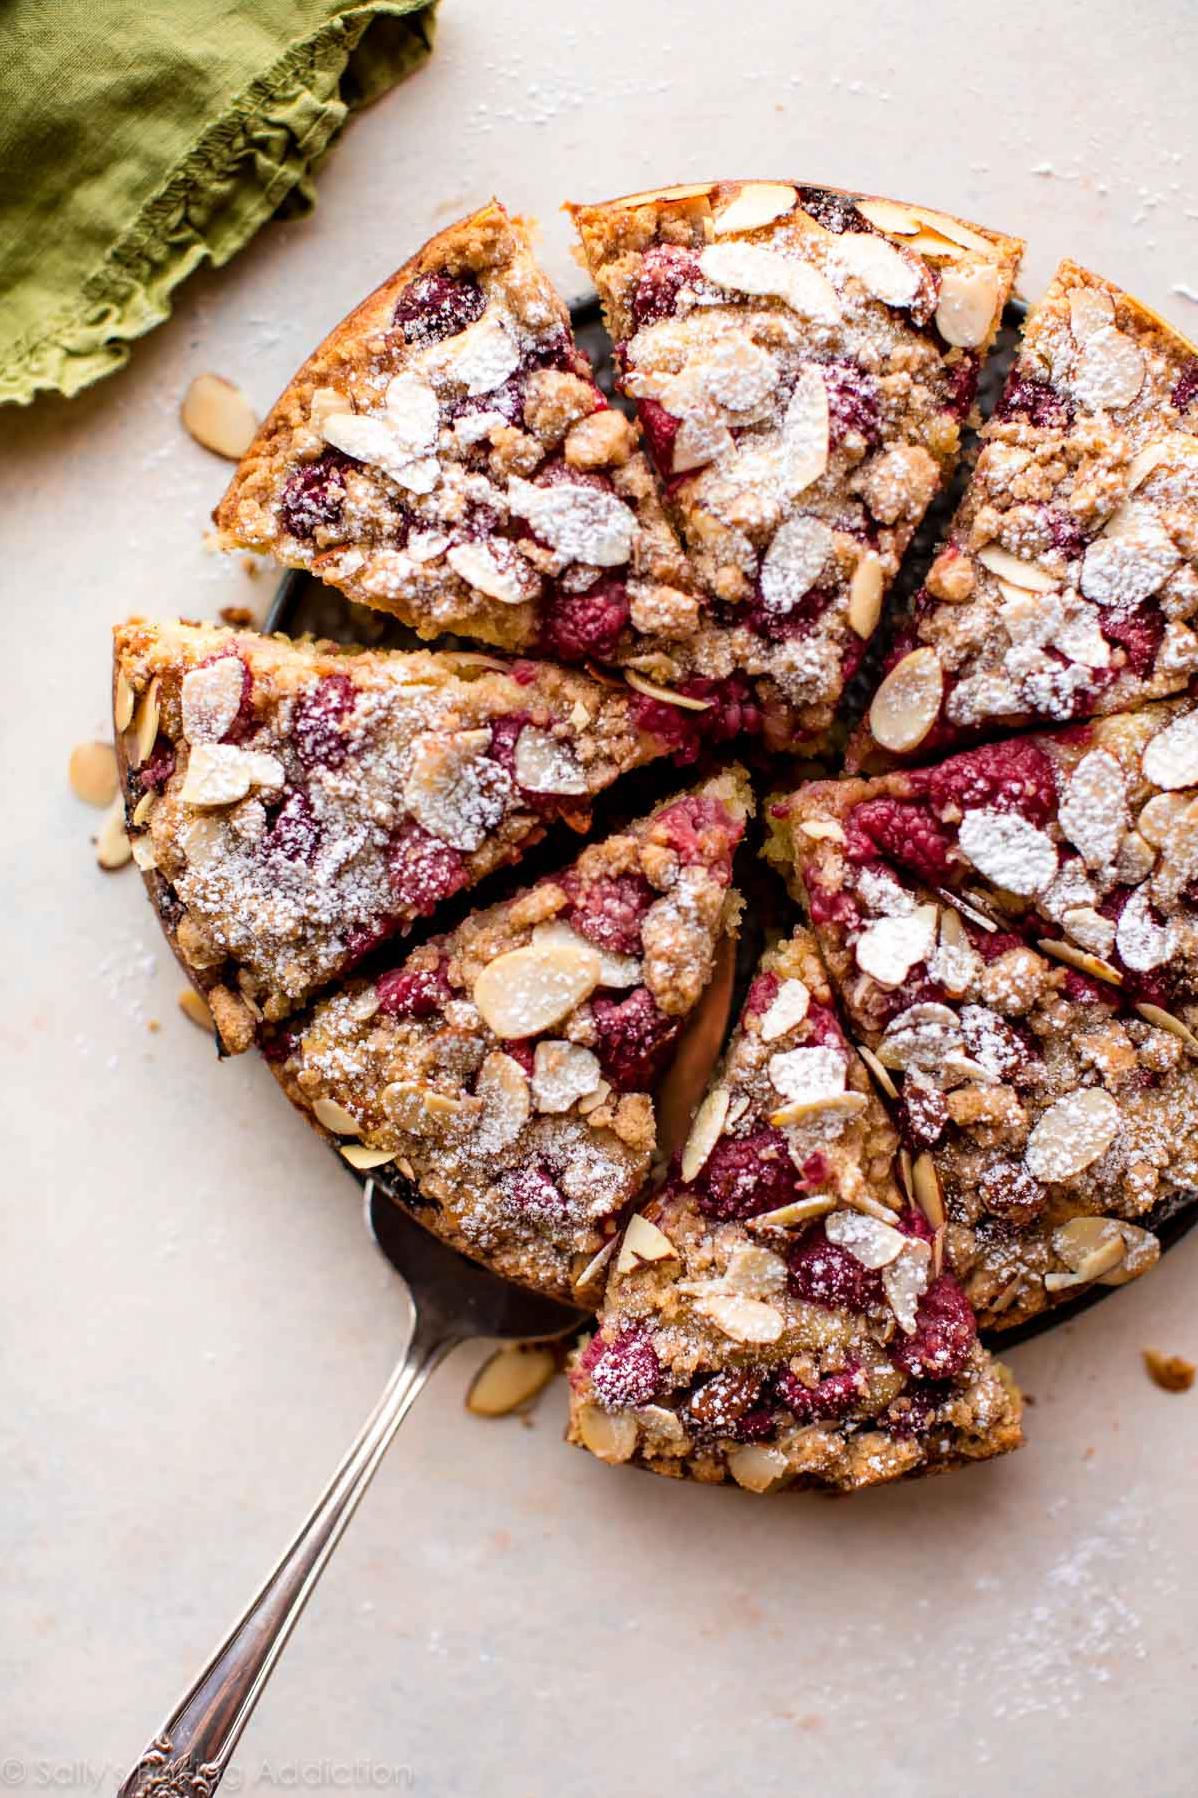  Indulge in the sweetness of ripe raspberries and the nutty crunch of toasted almonds.